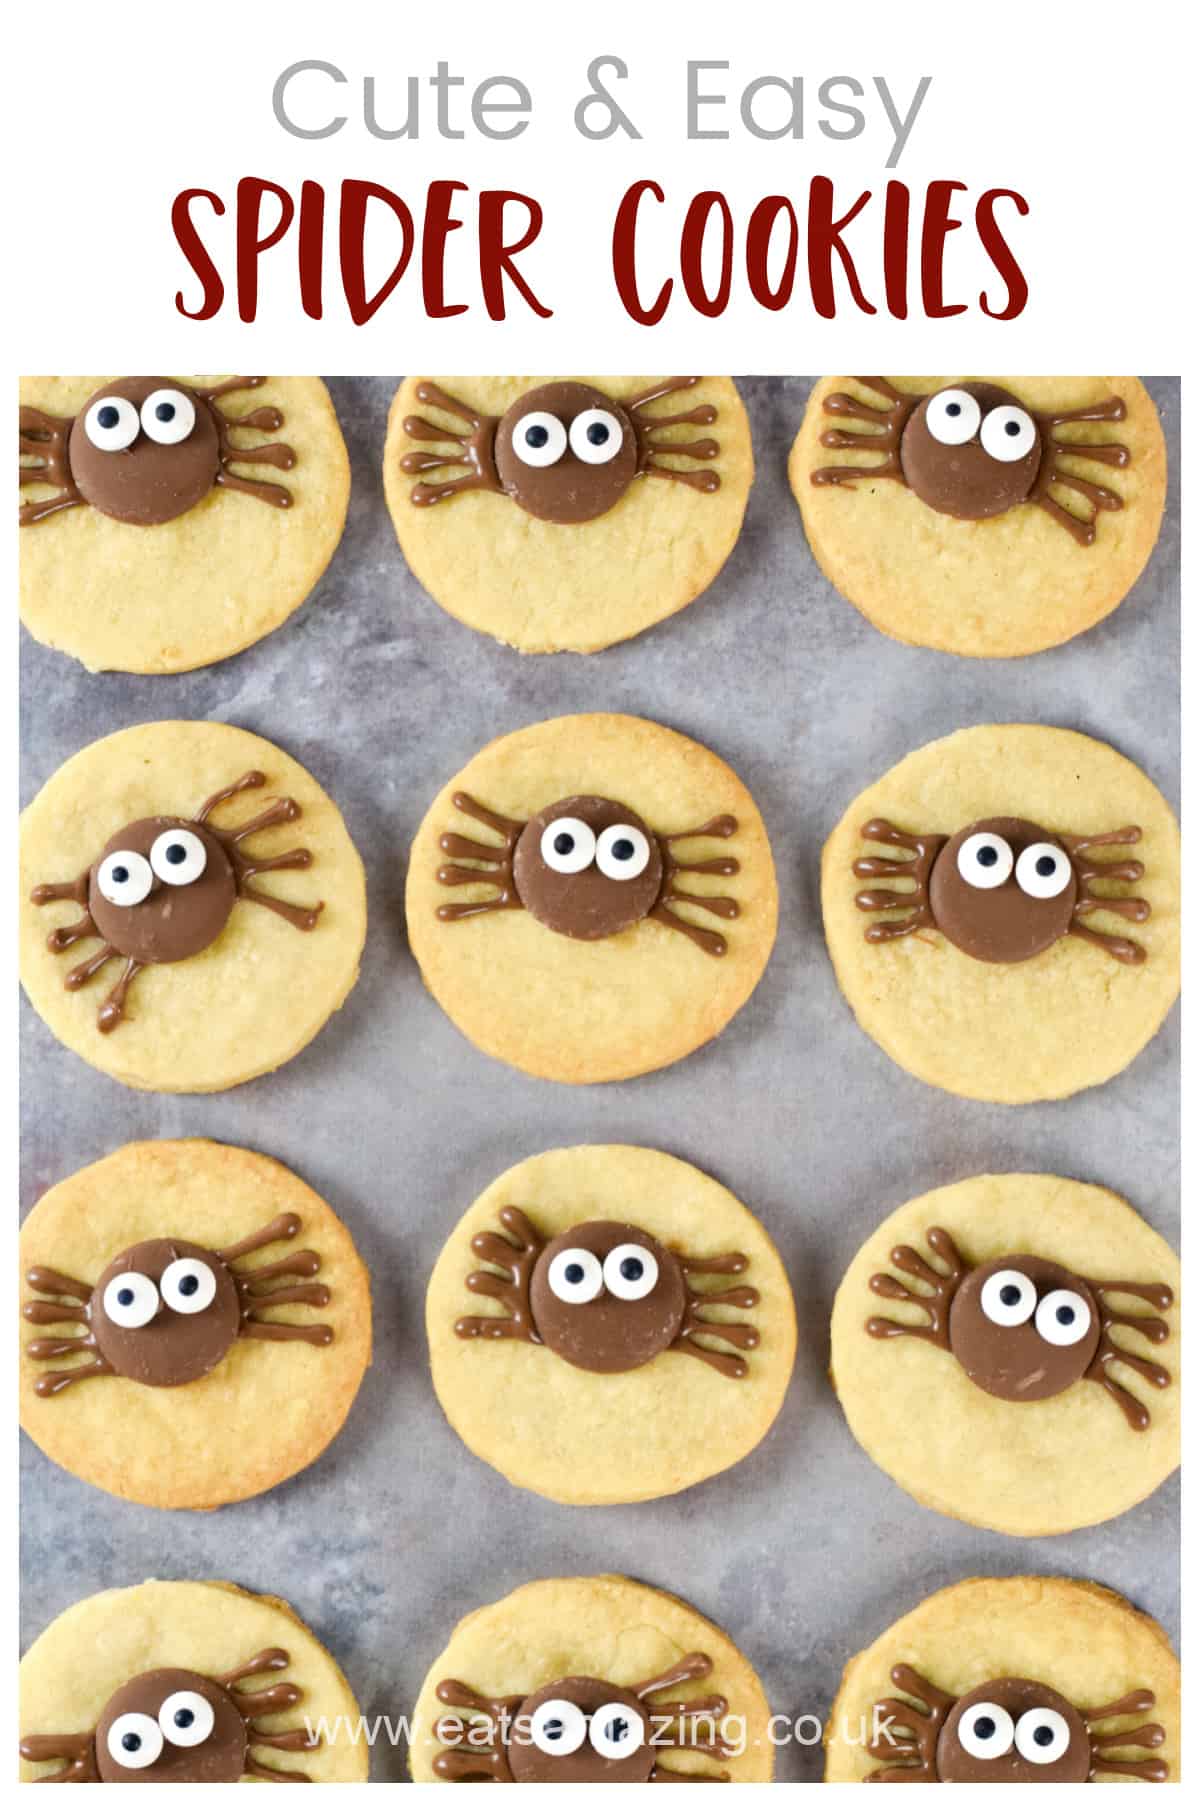 How to make easy chocolate spider topped cookies - fun Halloween recipe for kids perfect for Halloween party food